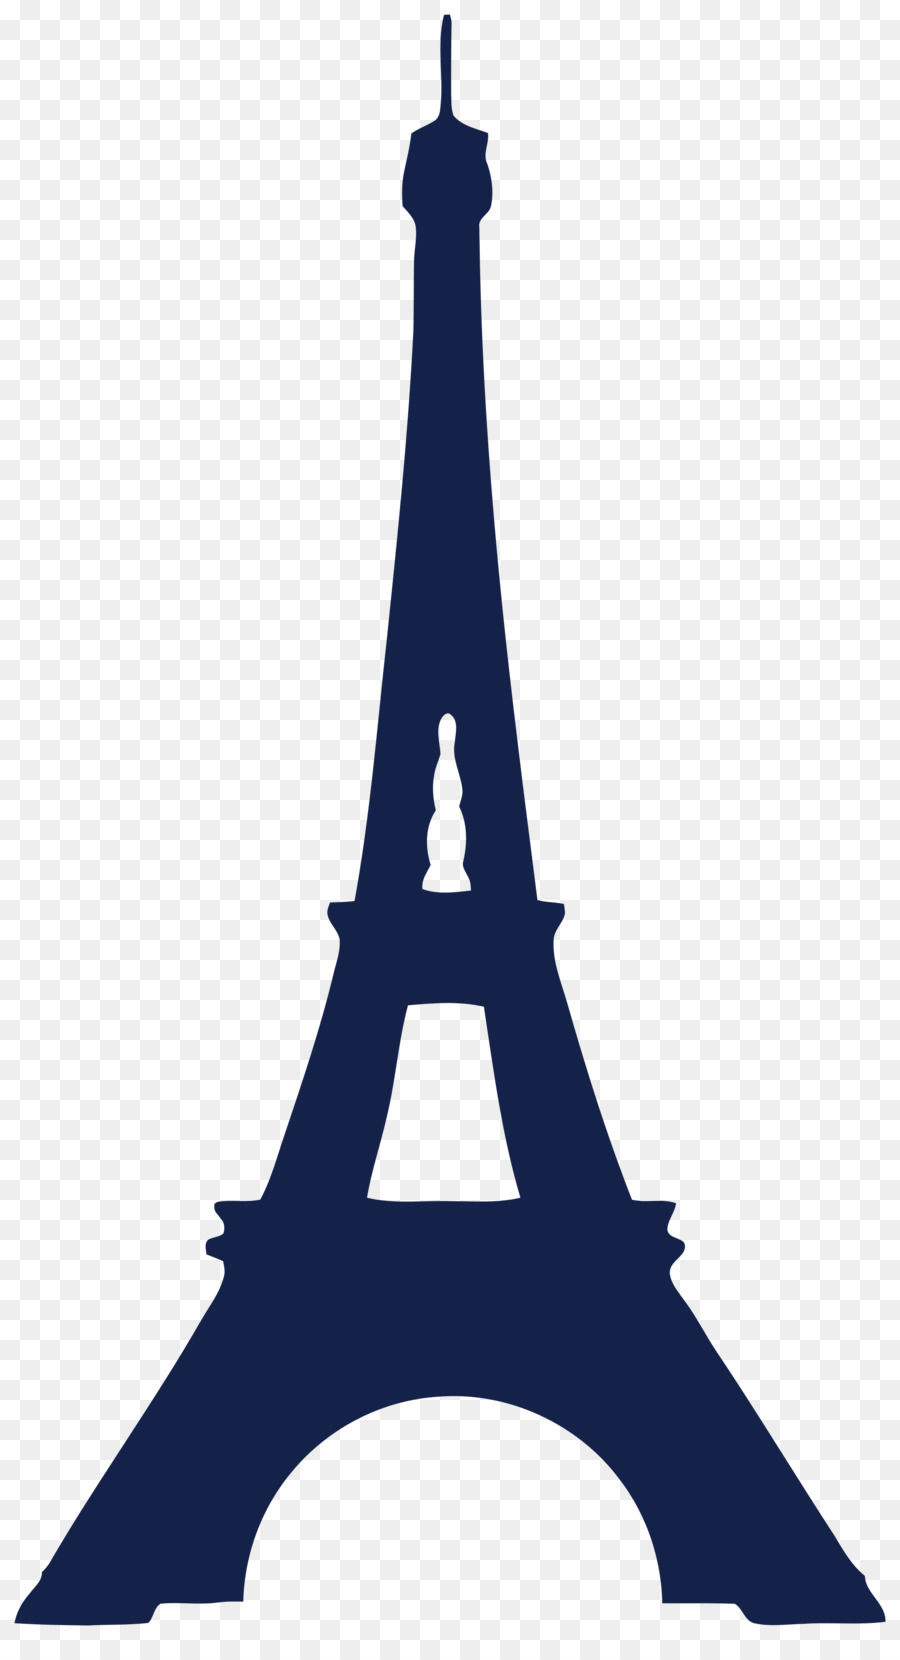 Eiffel Tower Silhouette Clip art - eiffel tower png download - 2000*3645 - Free Transparent Eiffel Tower png Download.